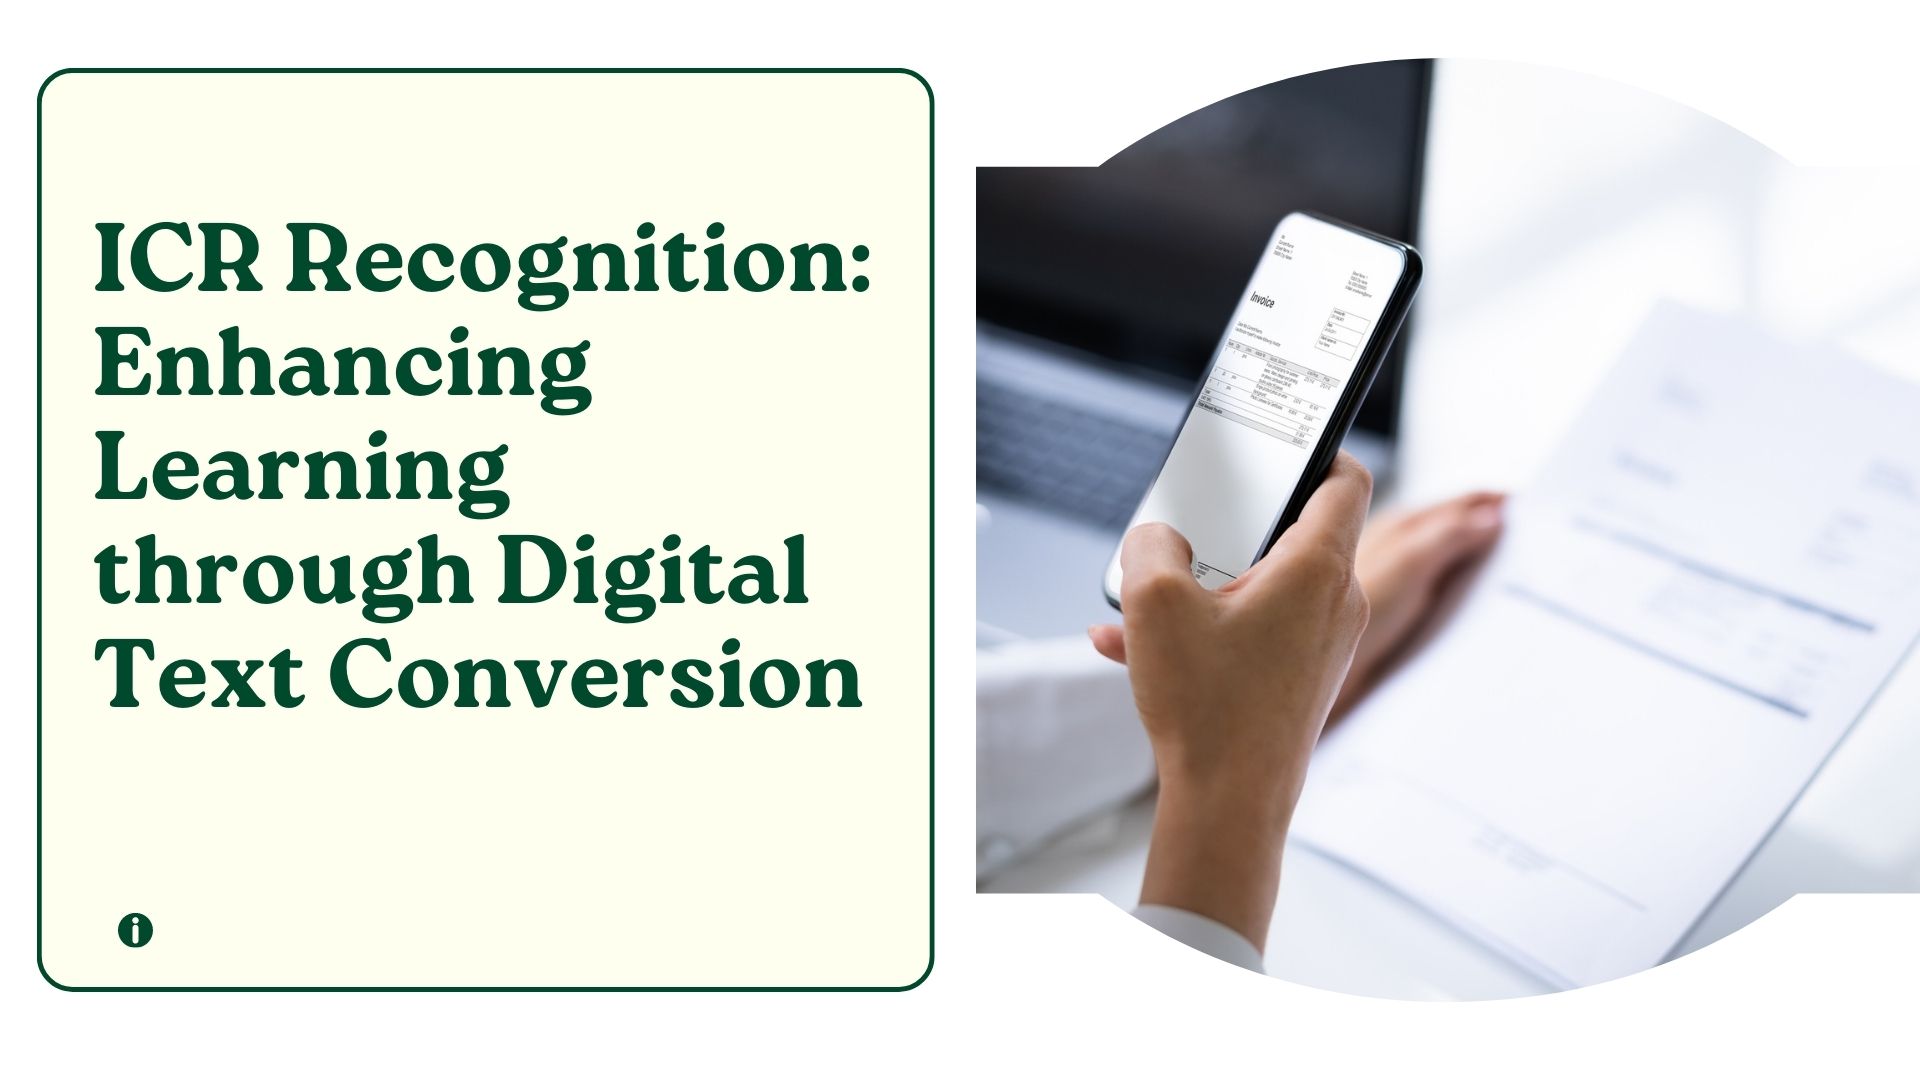 ICR Recognition: Enhancing Learning through Digital Text Conversion